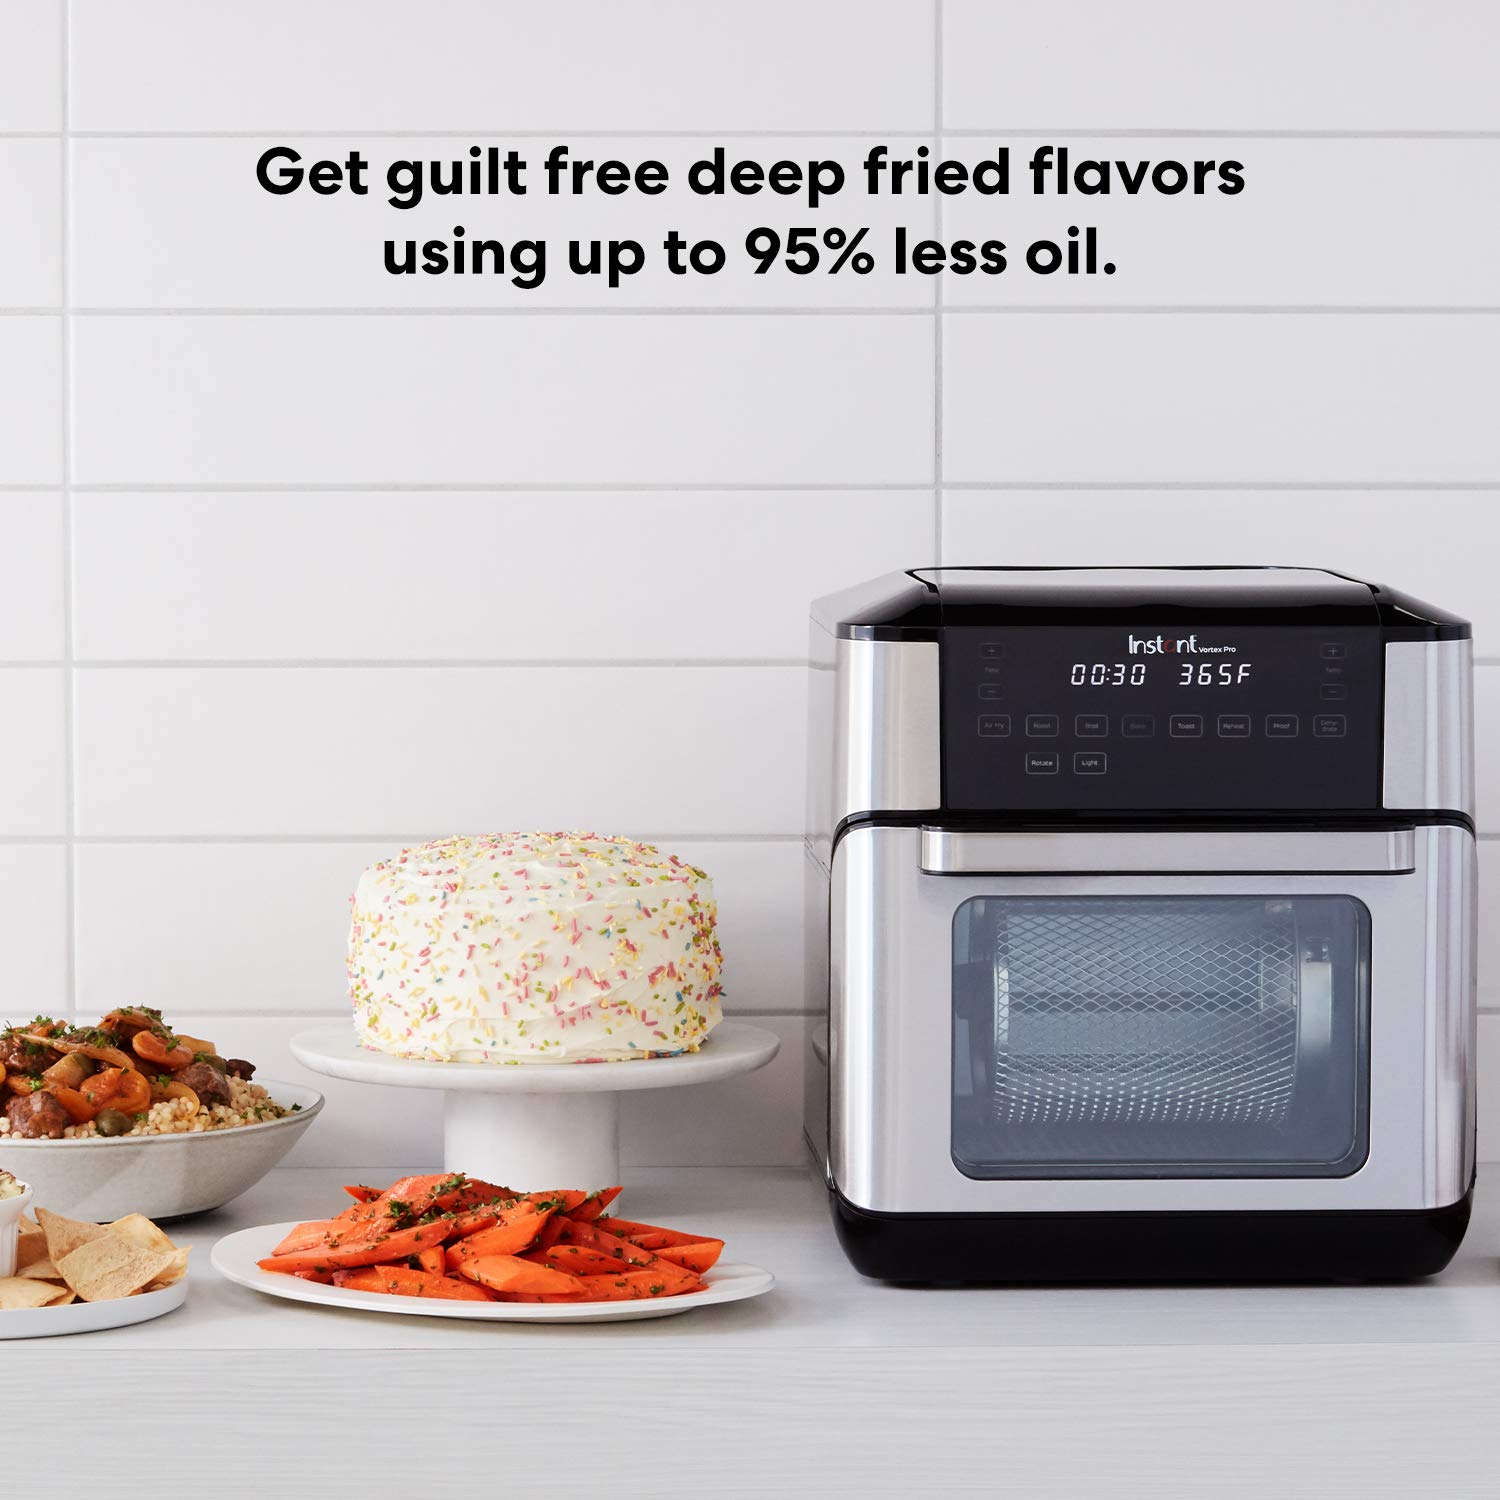 Instant Vortex Pro Air Fryer, 10 Quart, 9-in-1 Rotisserie and Convection Oven, From the Makers of Instant Pot with EvenCrisp Technology, App With Over 100 Recipes, 1500W, Stainless Steel